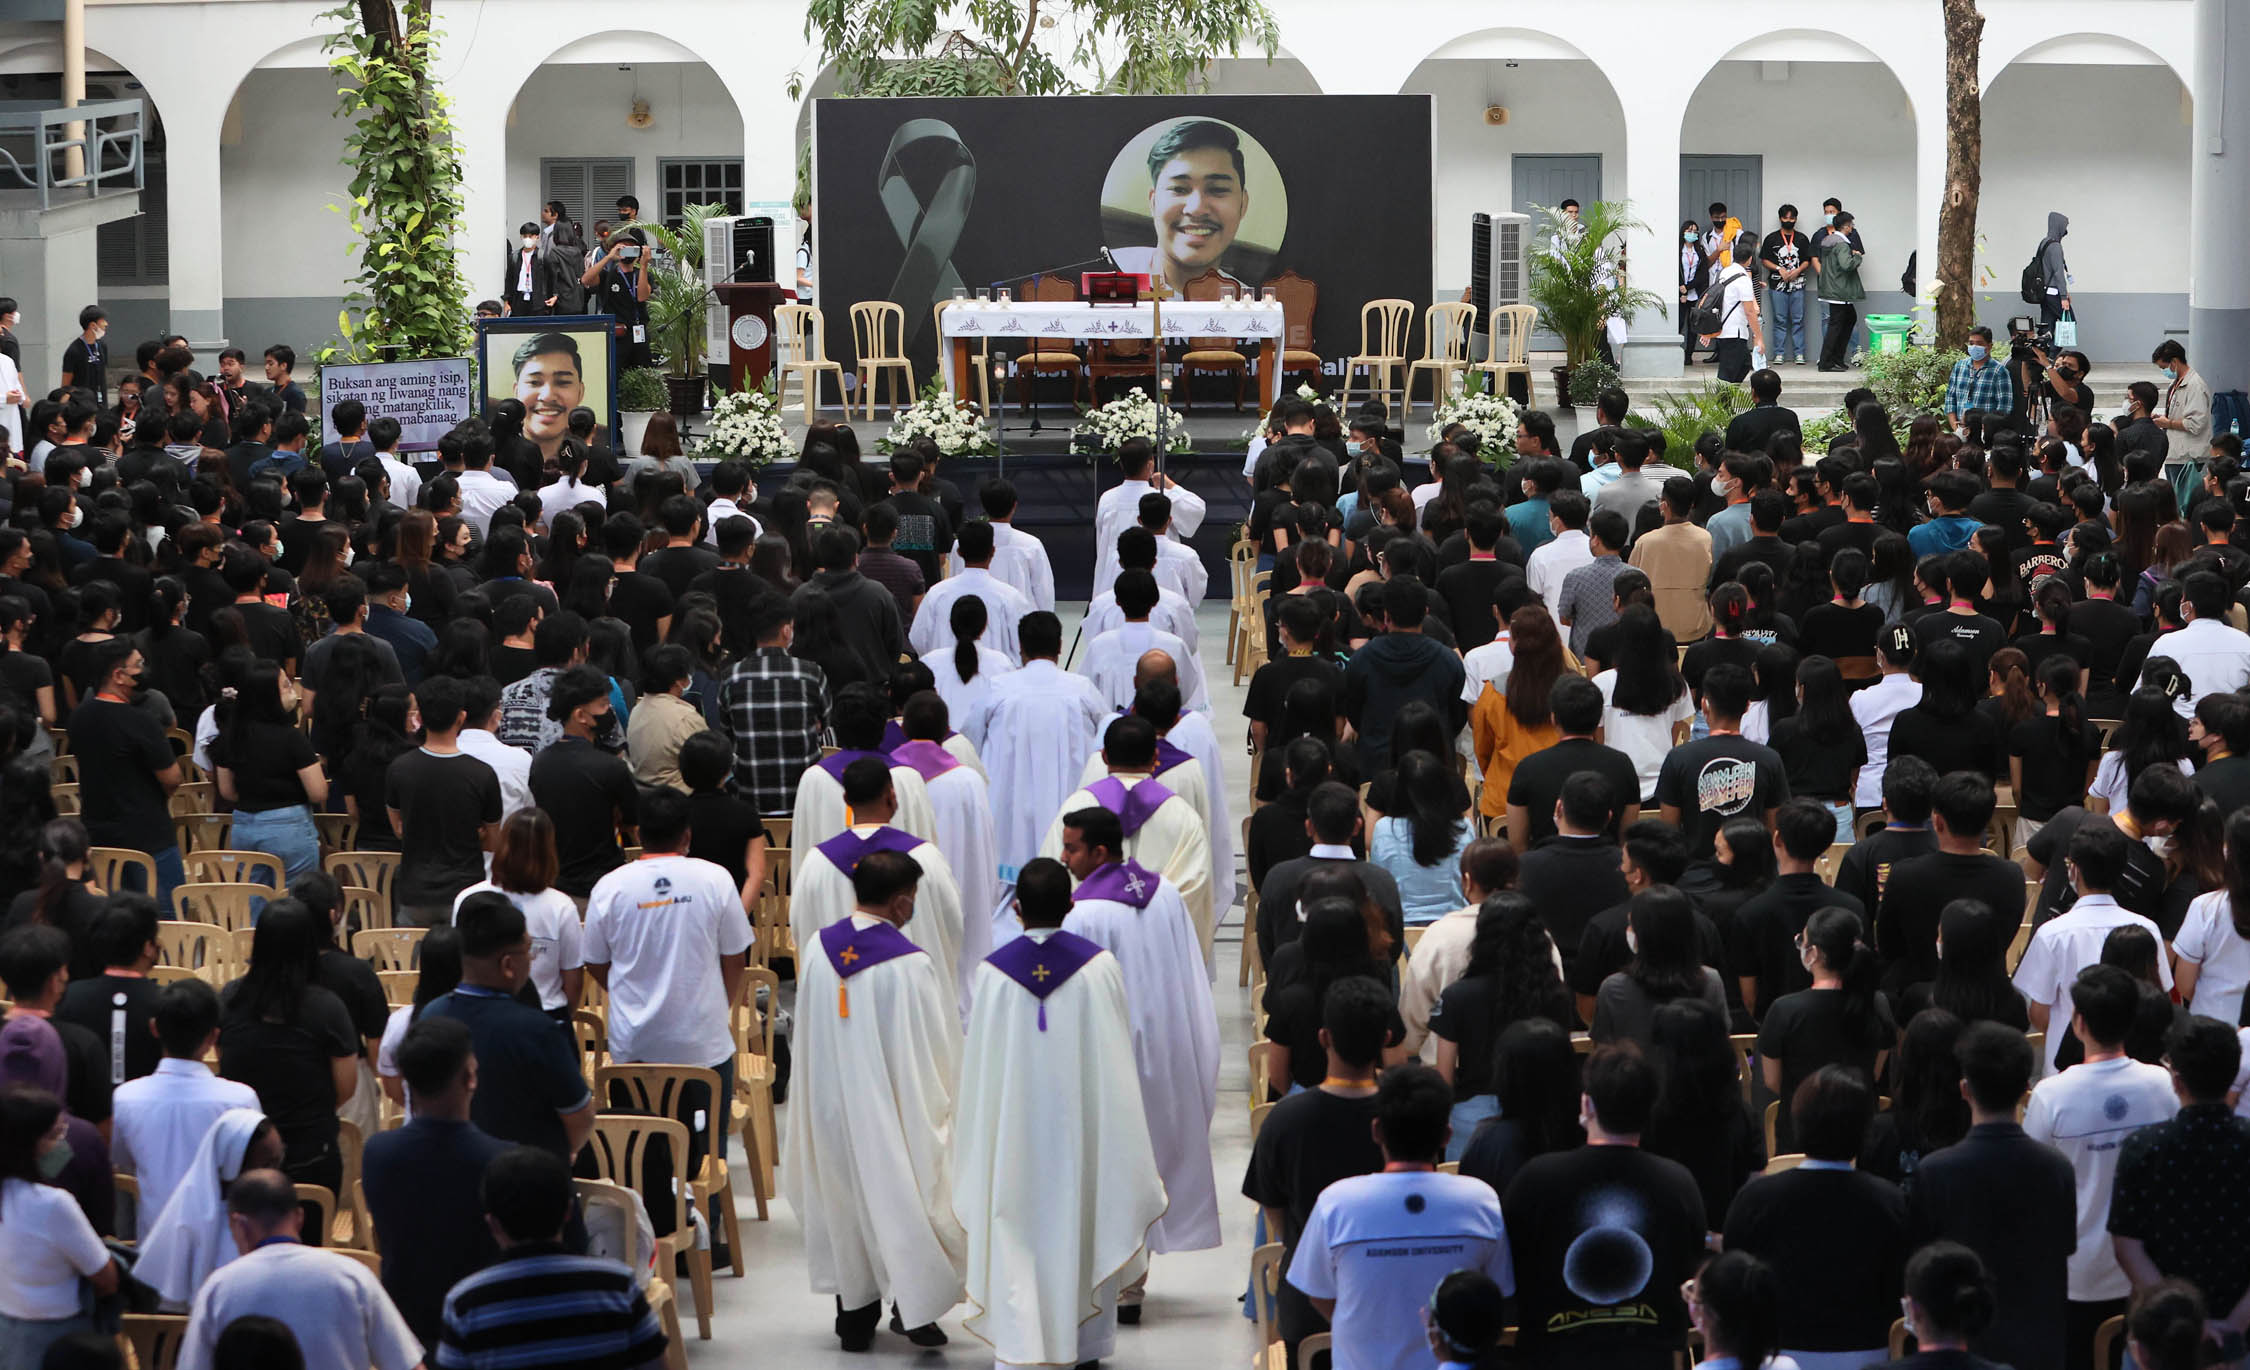 Hundreds of students and school officials of Adamson University in Manila attend a requiem Mass on Thursday for 24-year-old chemistry major John Matthew Salilig, who allegedlydied at the hands of his fraternity brothers in the Tau Gamma Phi last month